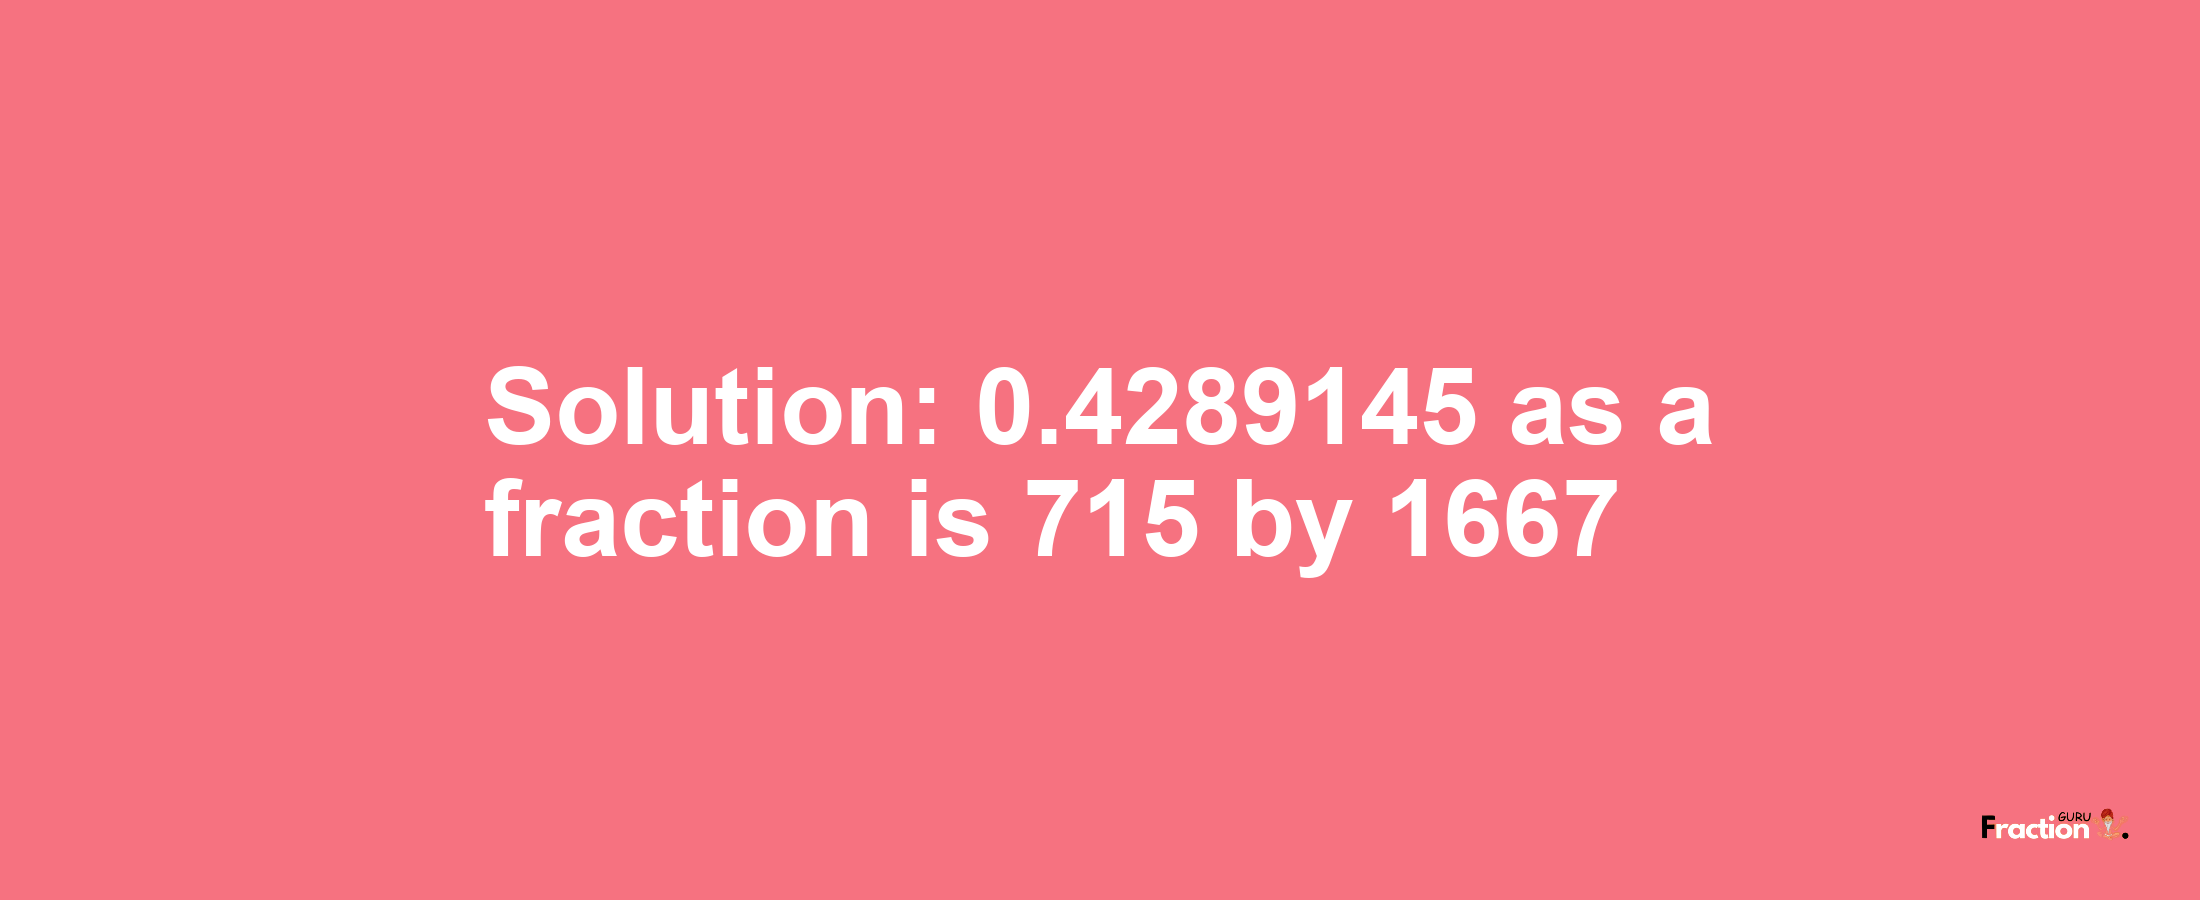 Solution:0.4289145 as a fraction is 715/1667